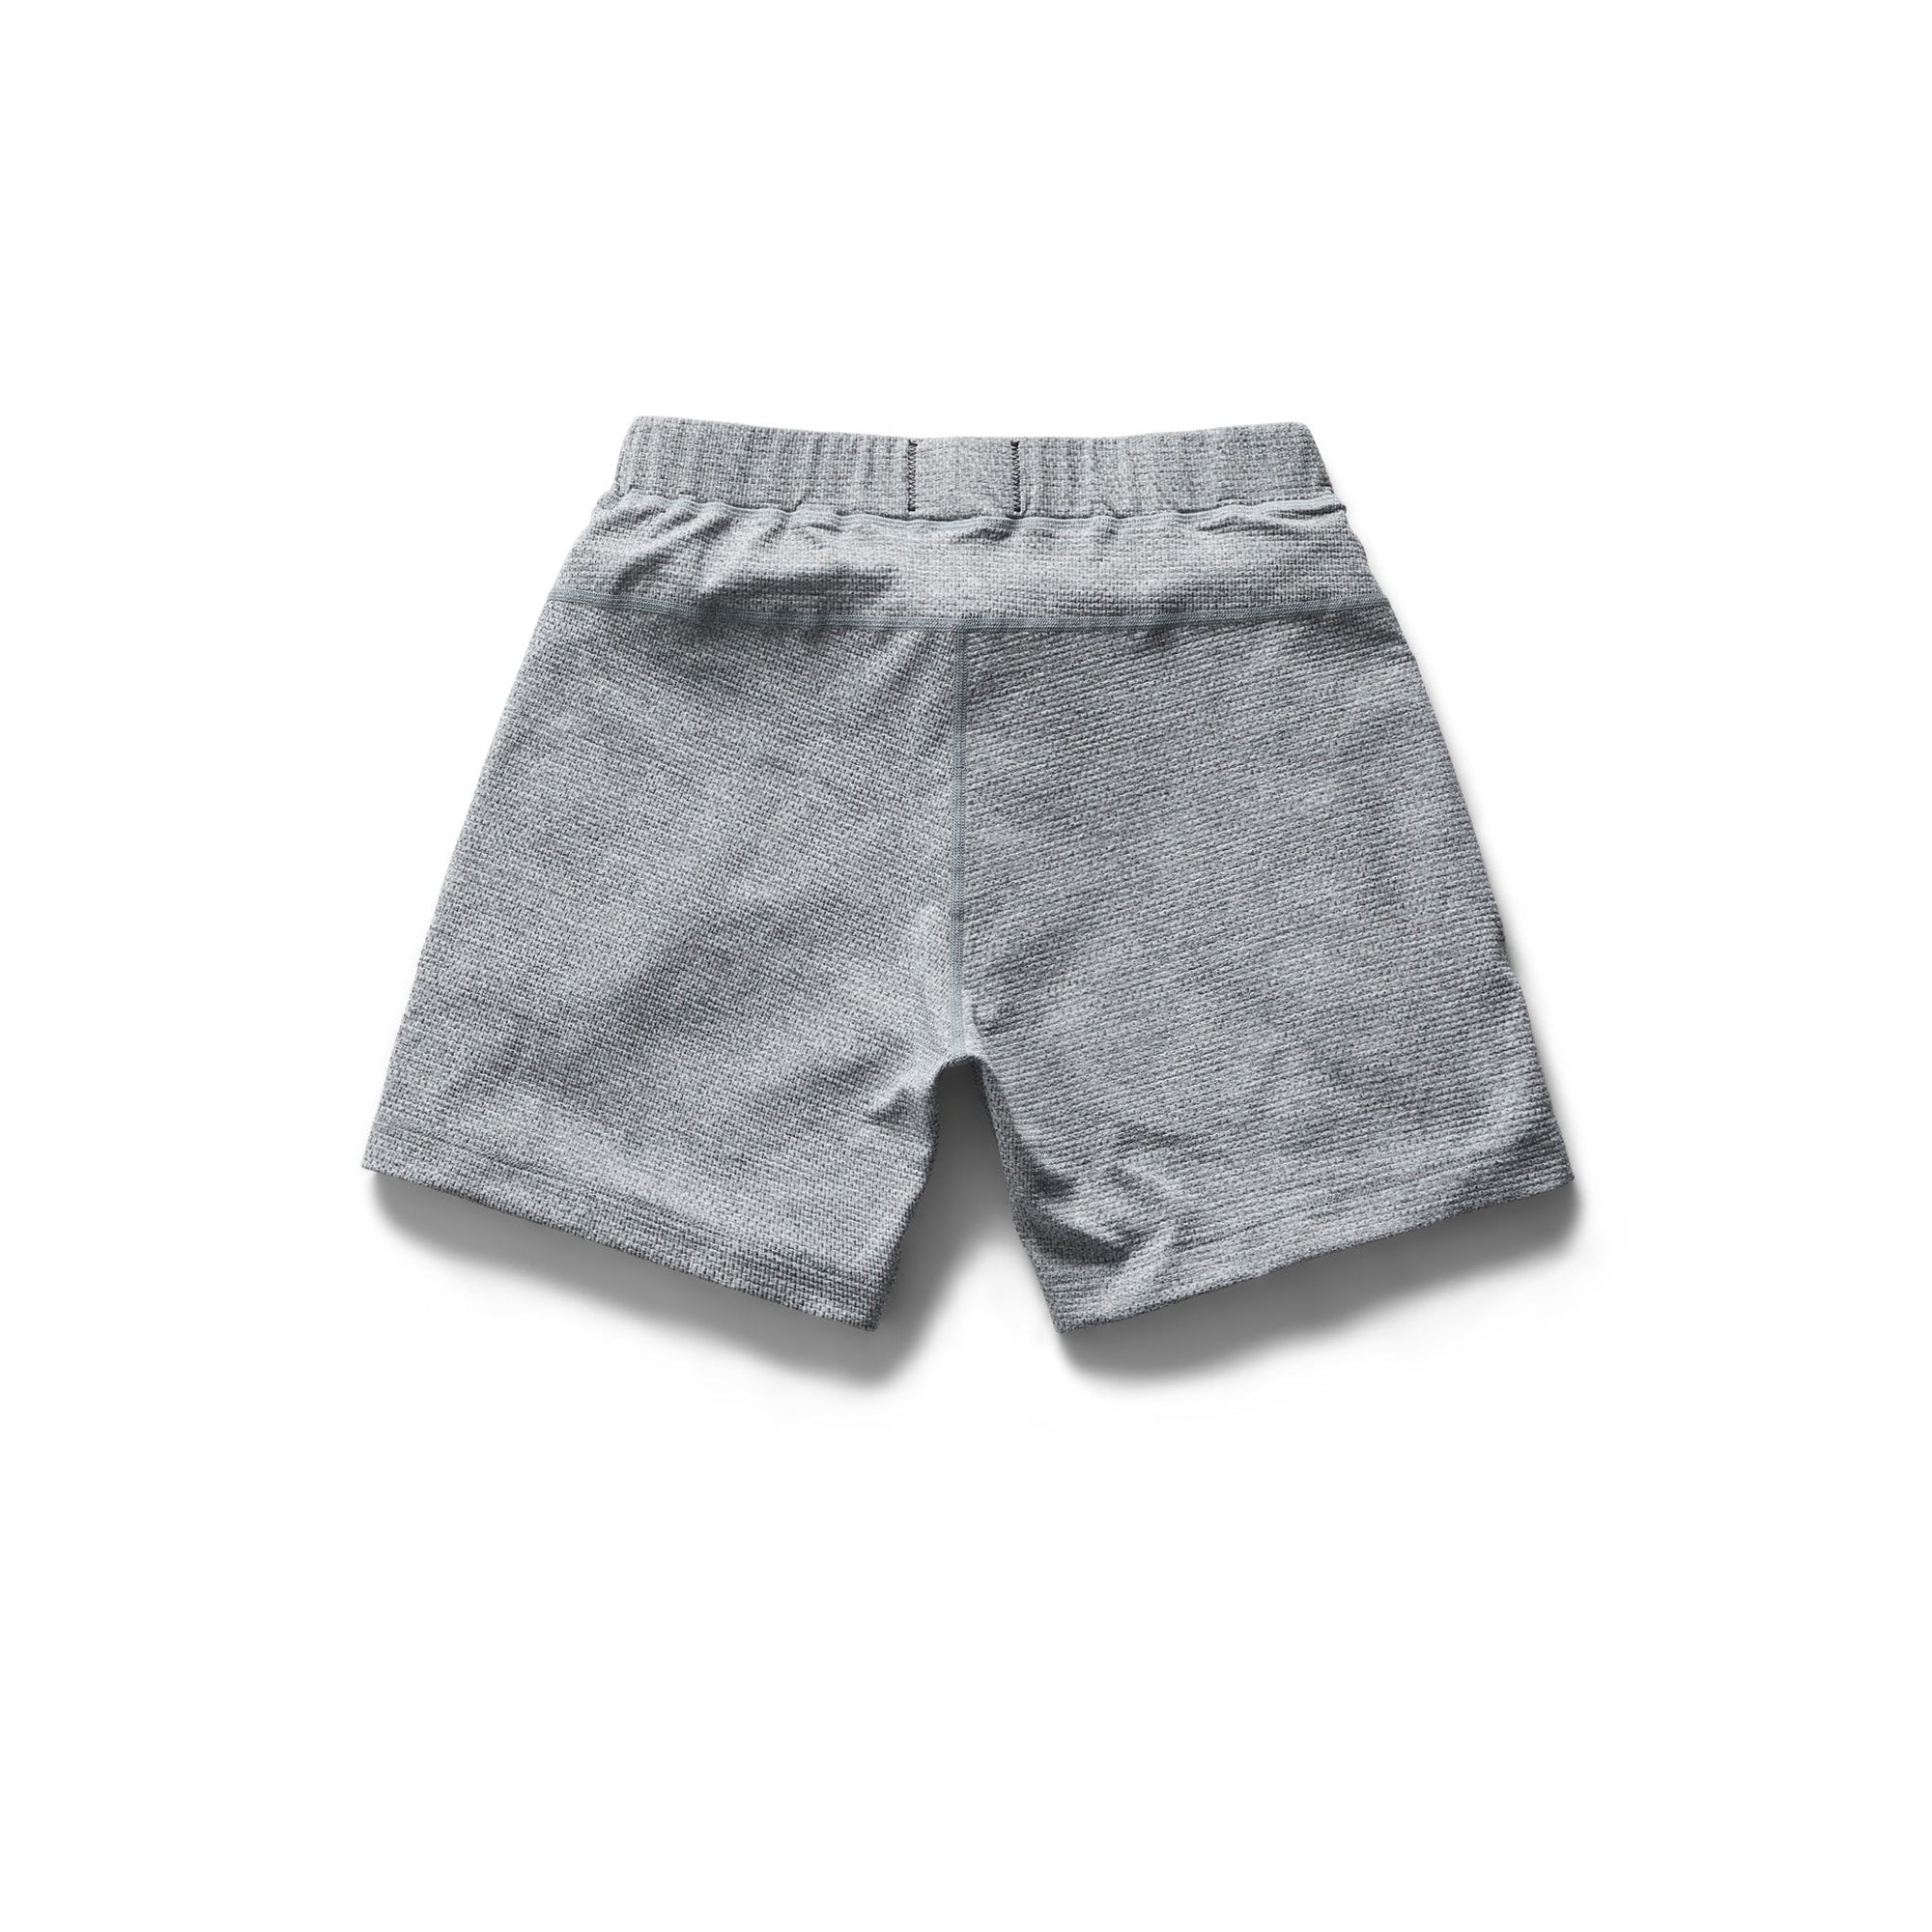 Reigning Champ Solotex Mesh Short in Heather Grey